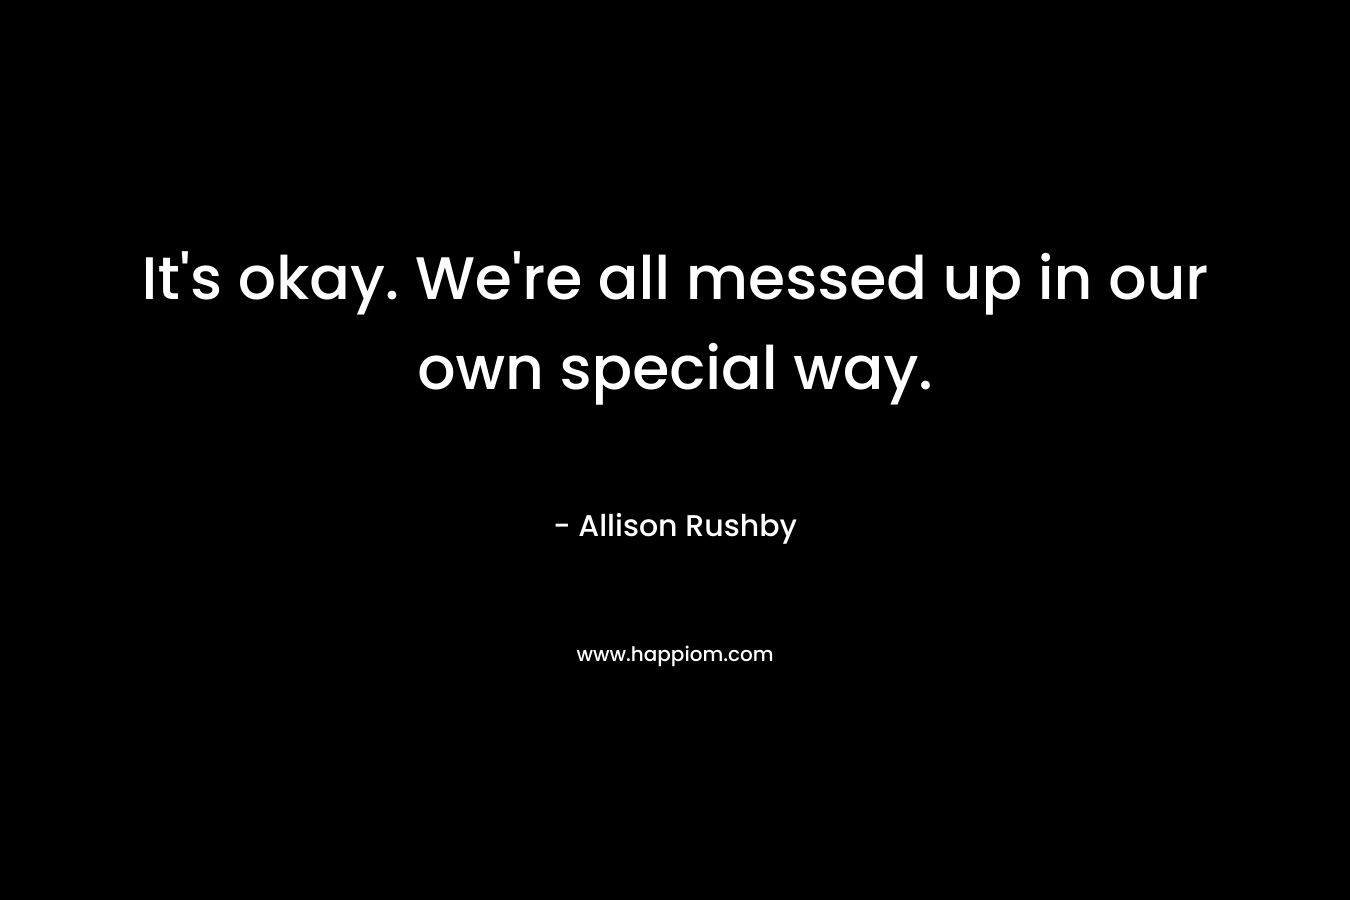 It’s okay. We’re all messed up in our own special way. – Allison Rushby